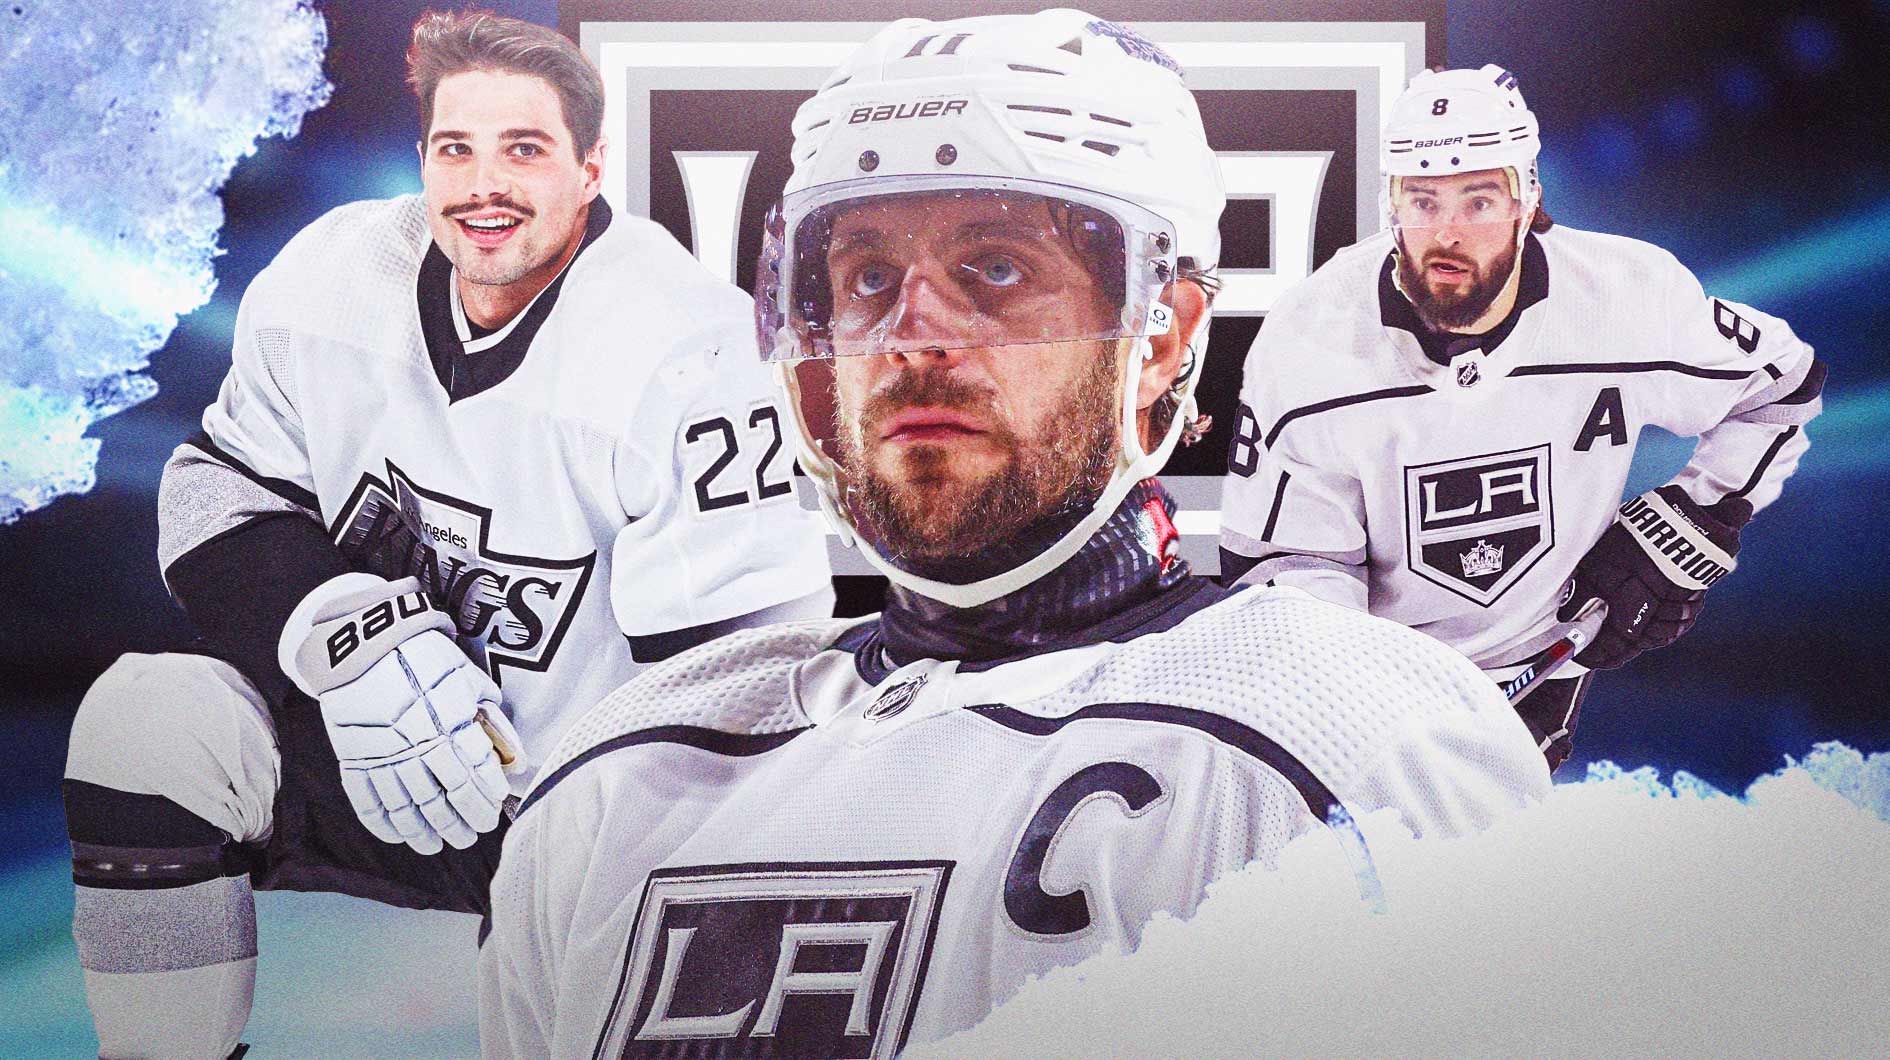 Anze Kopitar, Drew Doughty and Kevin Fiala all in image with fire around them, LA Kings logo, hockey rink in background